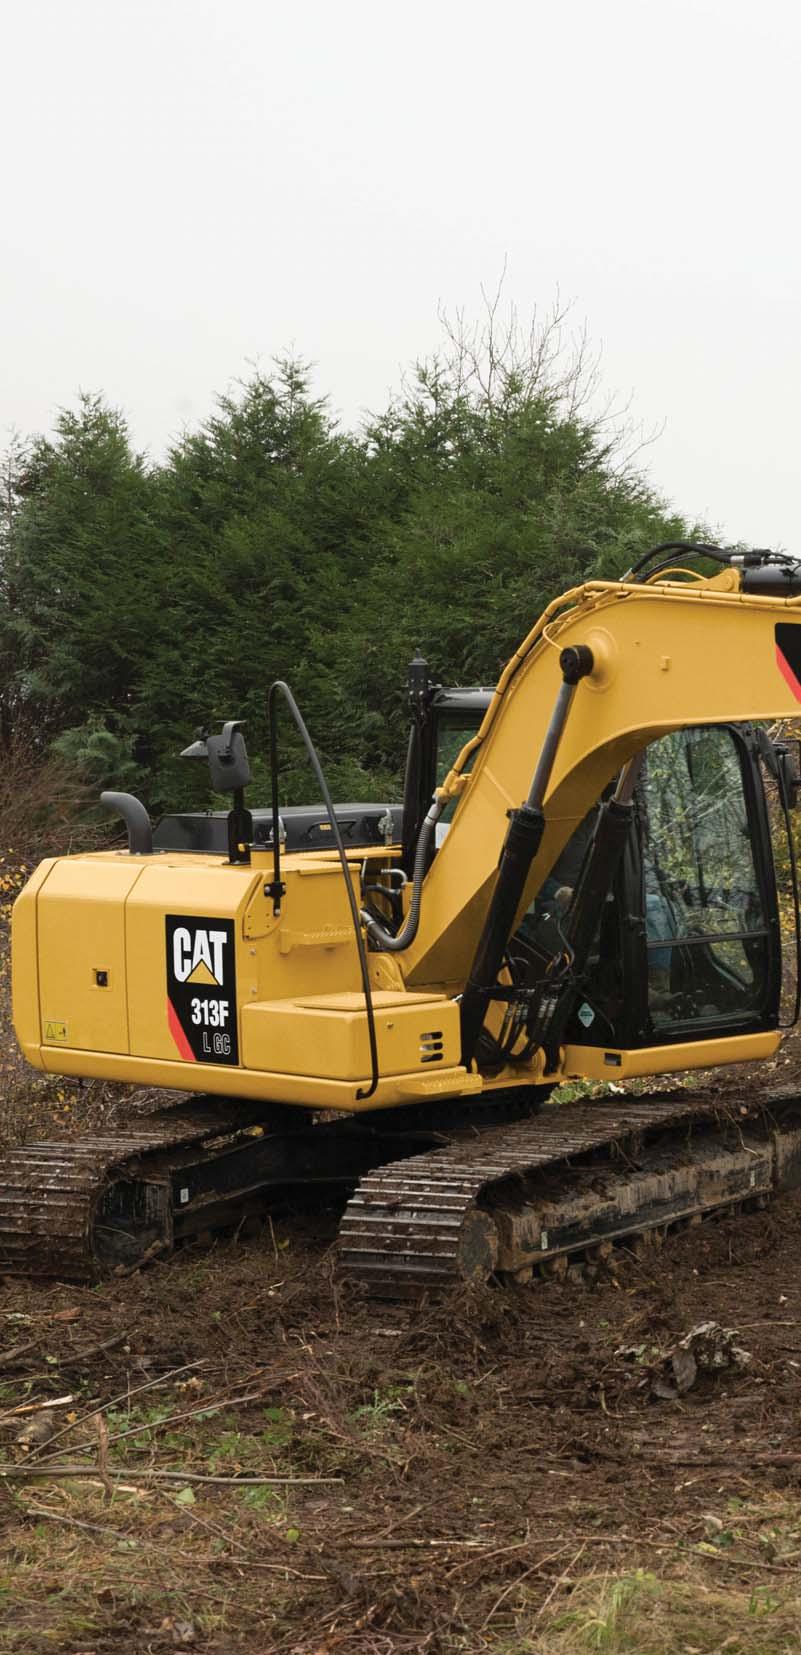 The new 313F L GC excavator is built for those who need dependable performance at a low cost per hour. The machine features an efficient C3.